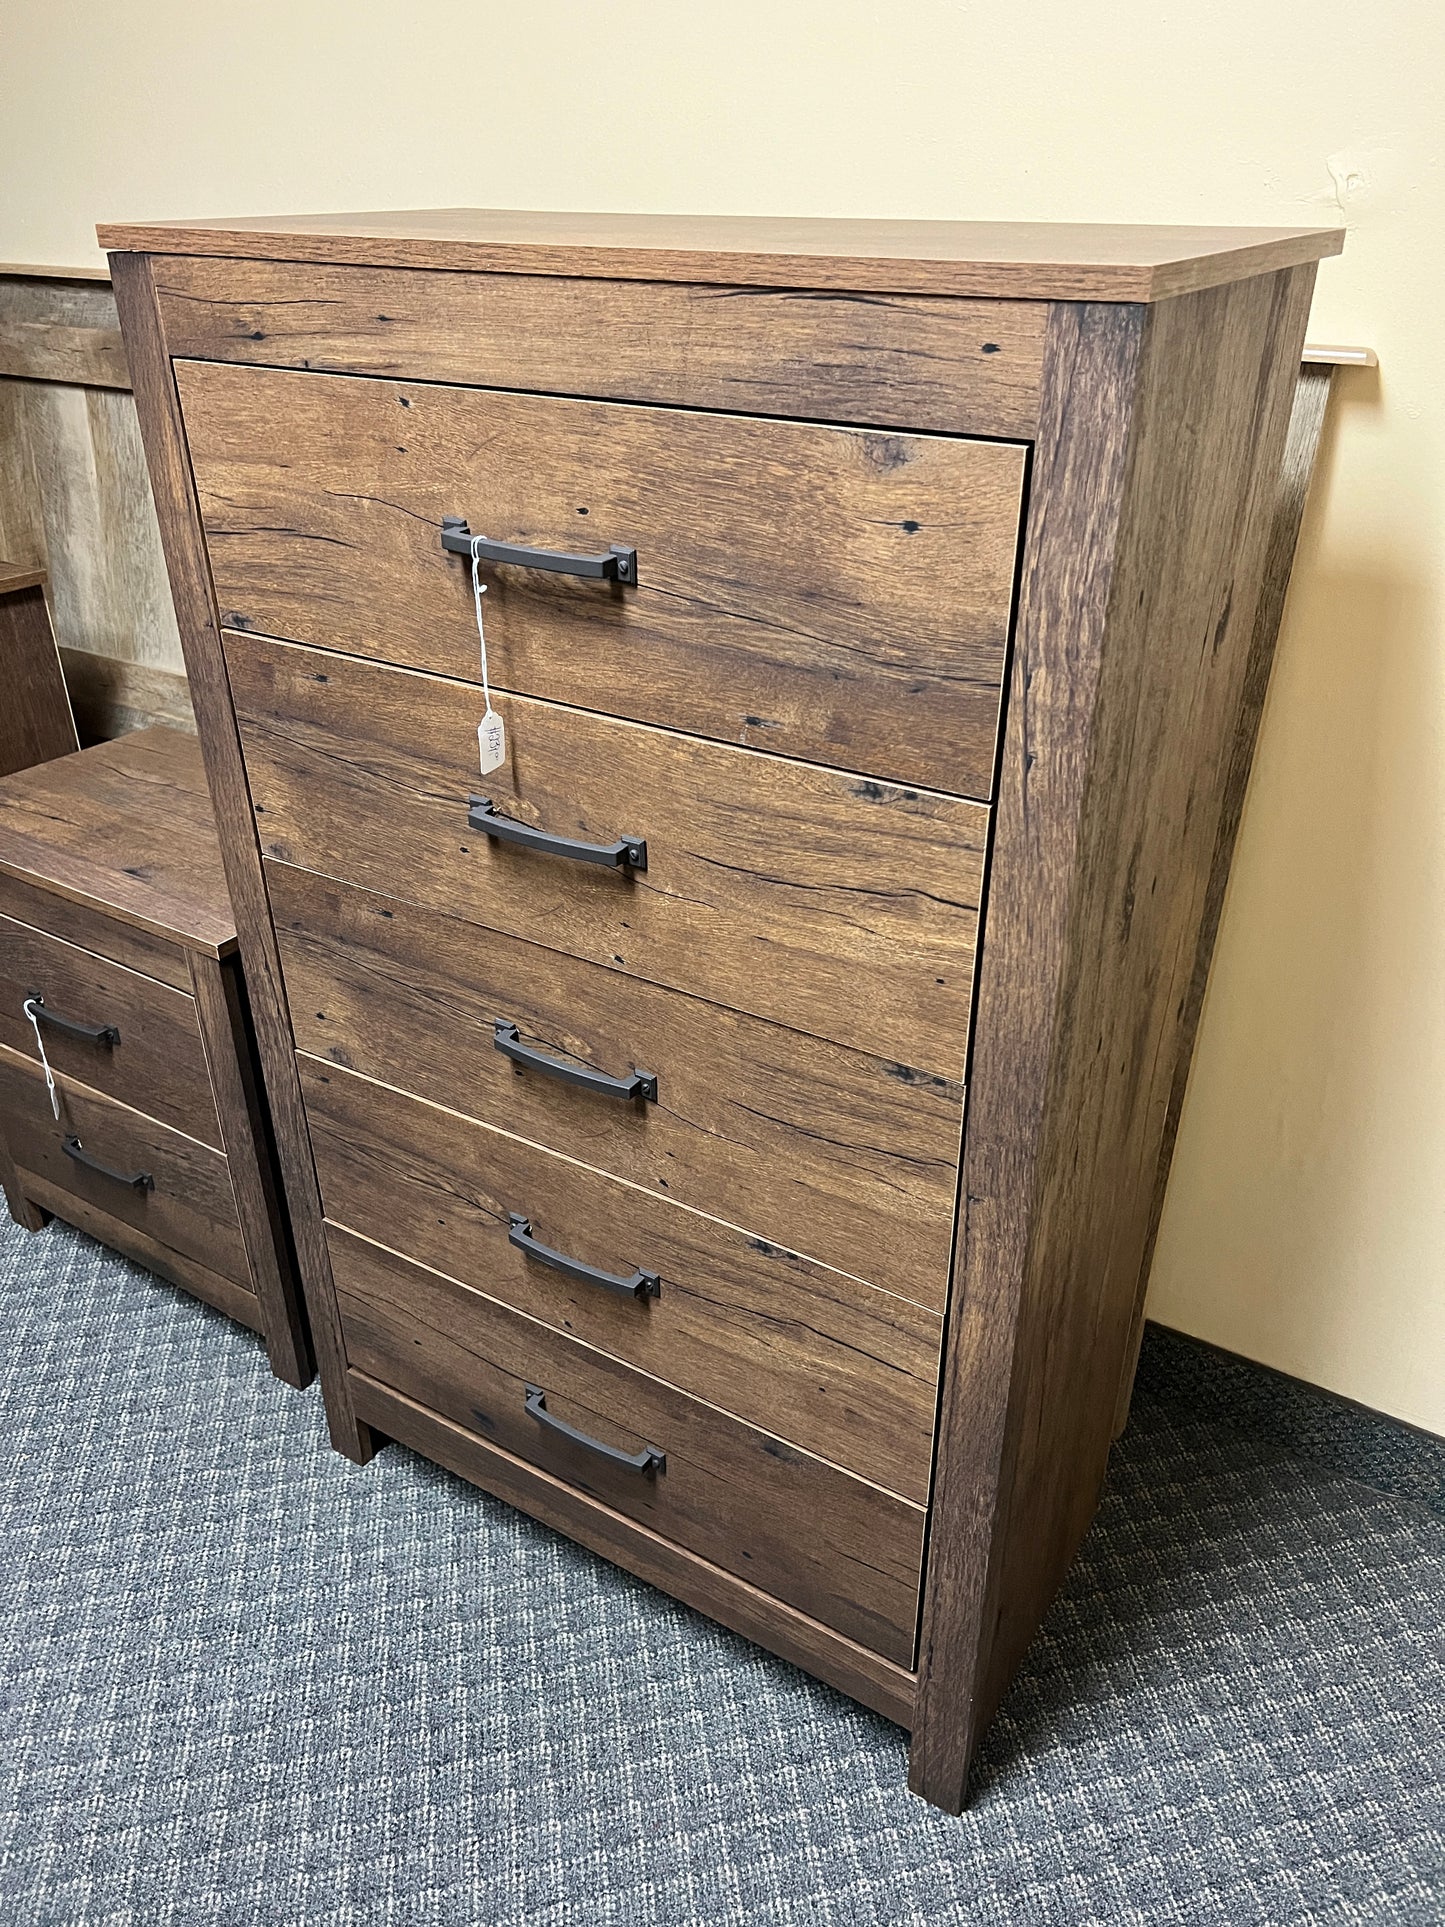 Brand new, Made in USA, pre-assembled, Rustic 4 piece bedroom set. Set comes with dresser, chest and both night stands